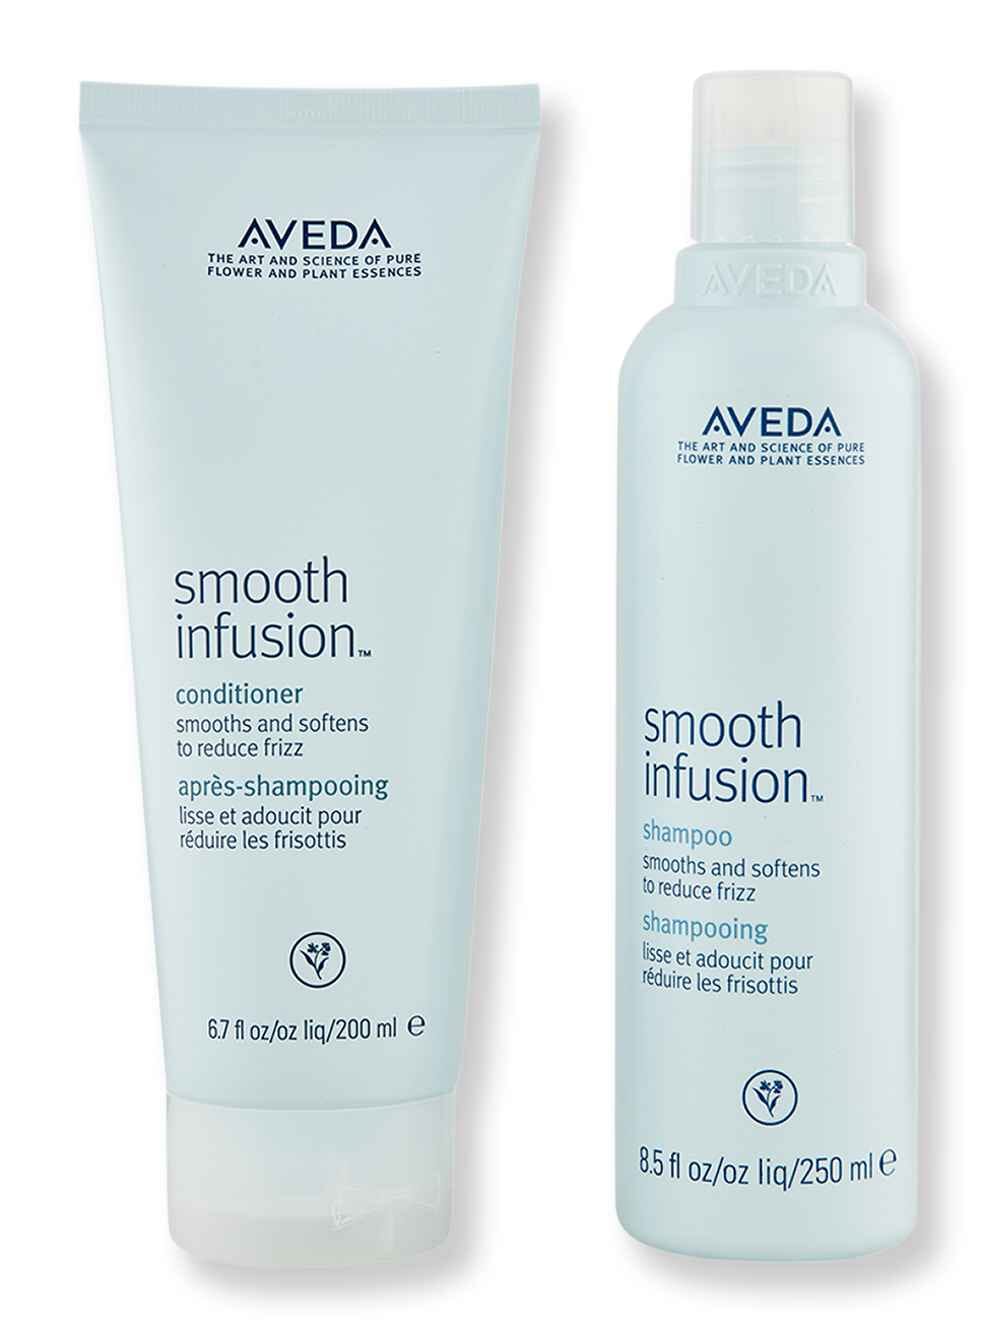 Aveda Aveda Smooth Infusion Shampoo 250 ml & Conditioner 200 ml Hair Care Value Sets 